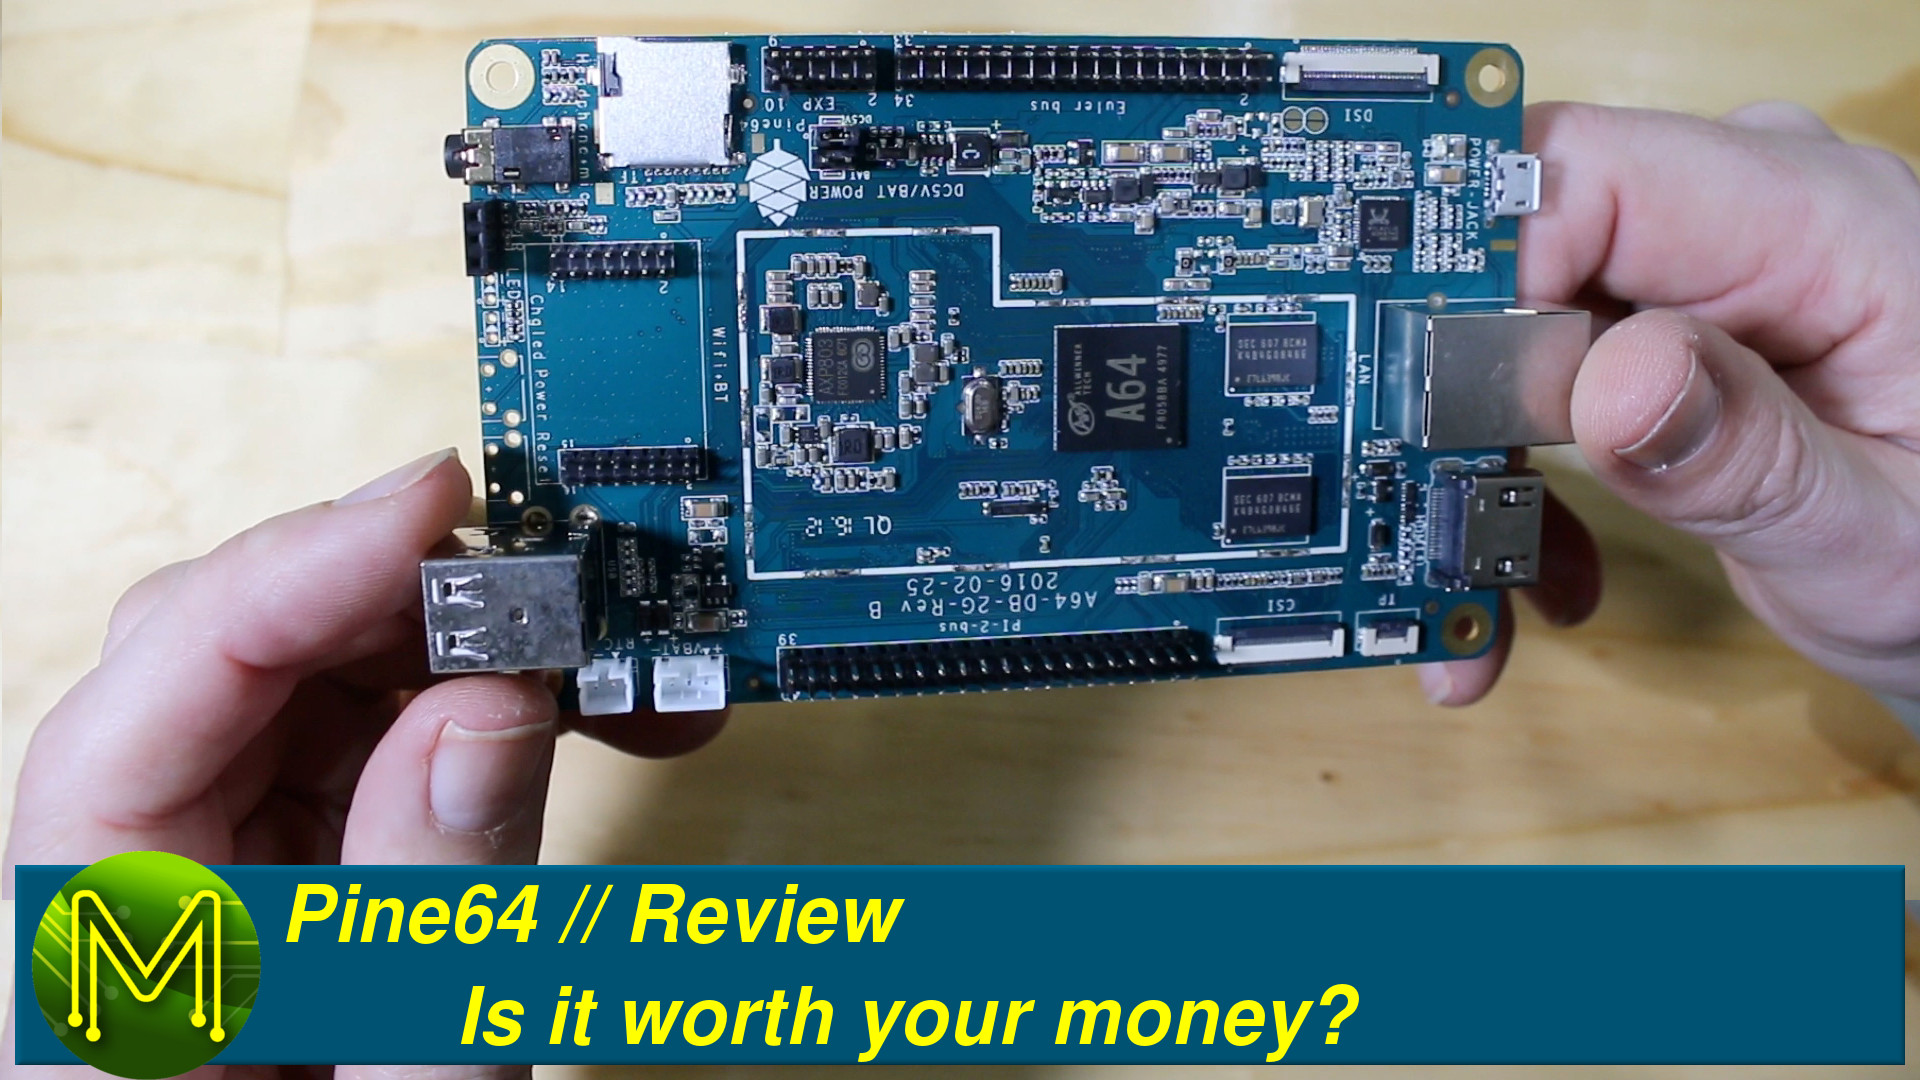 Pine64: Is it worth your money? // Review